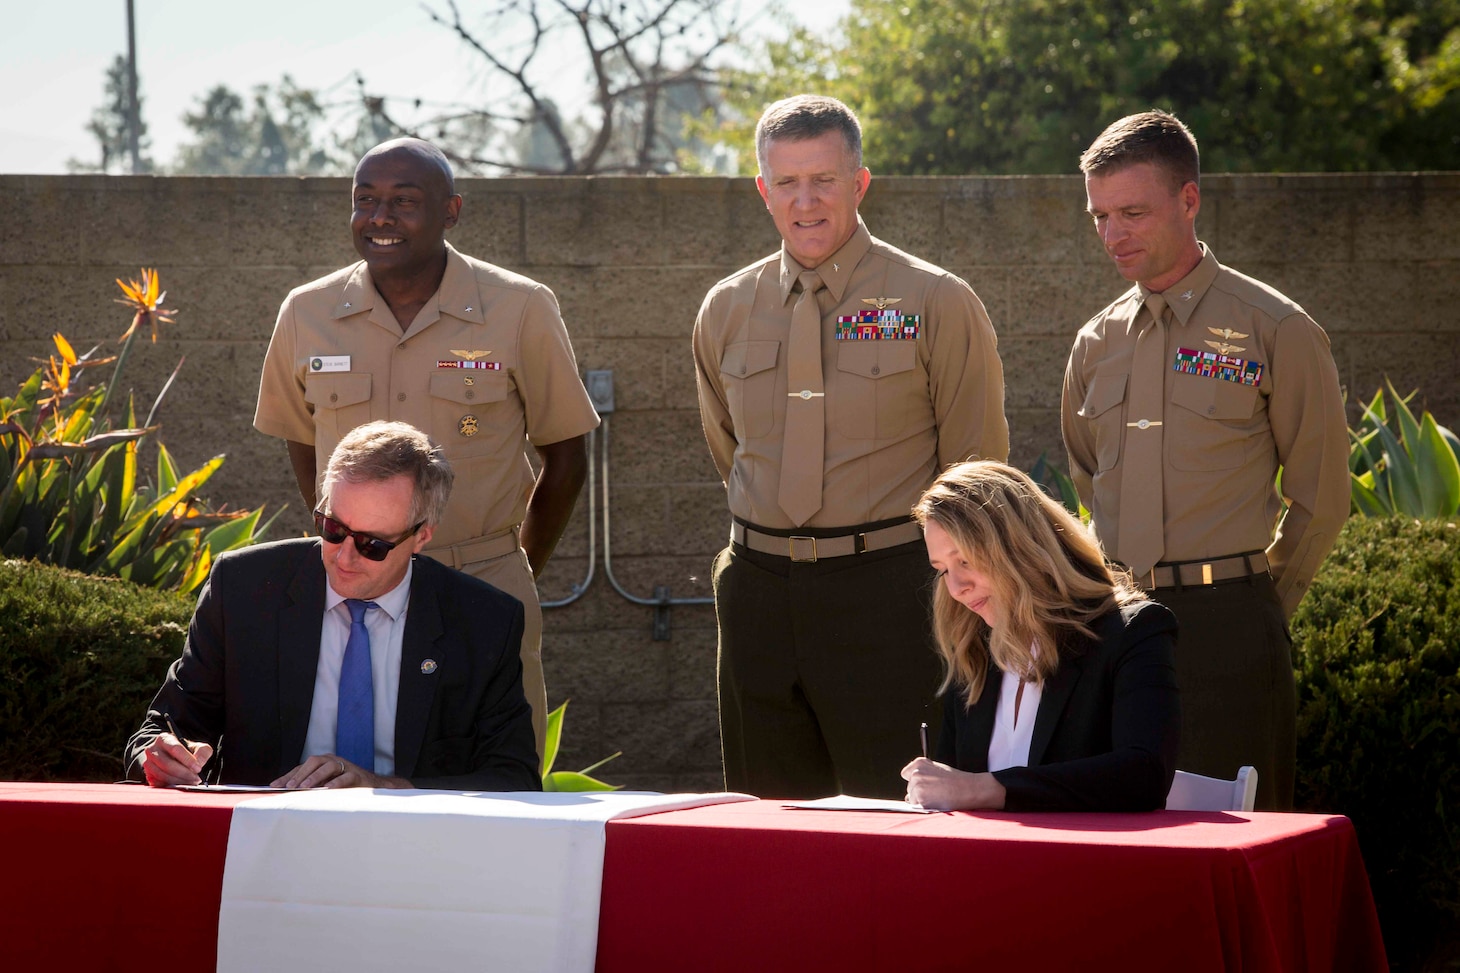 The Honorable Meredith A. Berger, performing the duties of the Under Secretary of the Navy, and David Hochschild, Chair, California Energy Commission, signed a Memorandum of Understanding, Dec. 1, 2021, renewing Department of the Navy cooperation with the CEC for another five years in a partnership that supports Navy and Marine Corps installation efforts to address energy resilience issues, climate initiatives, fossil fuel reduction, greenhouse gas reductions, water consumption, and alternative fuel vehicles.